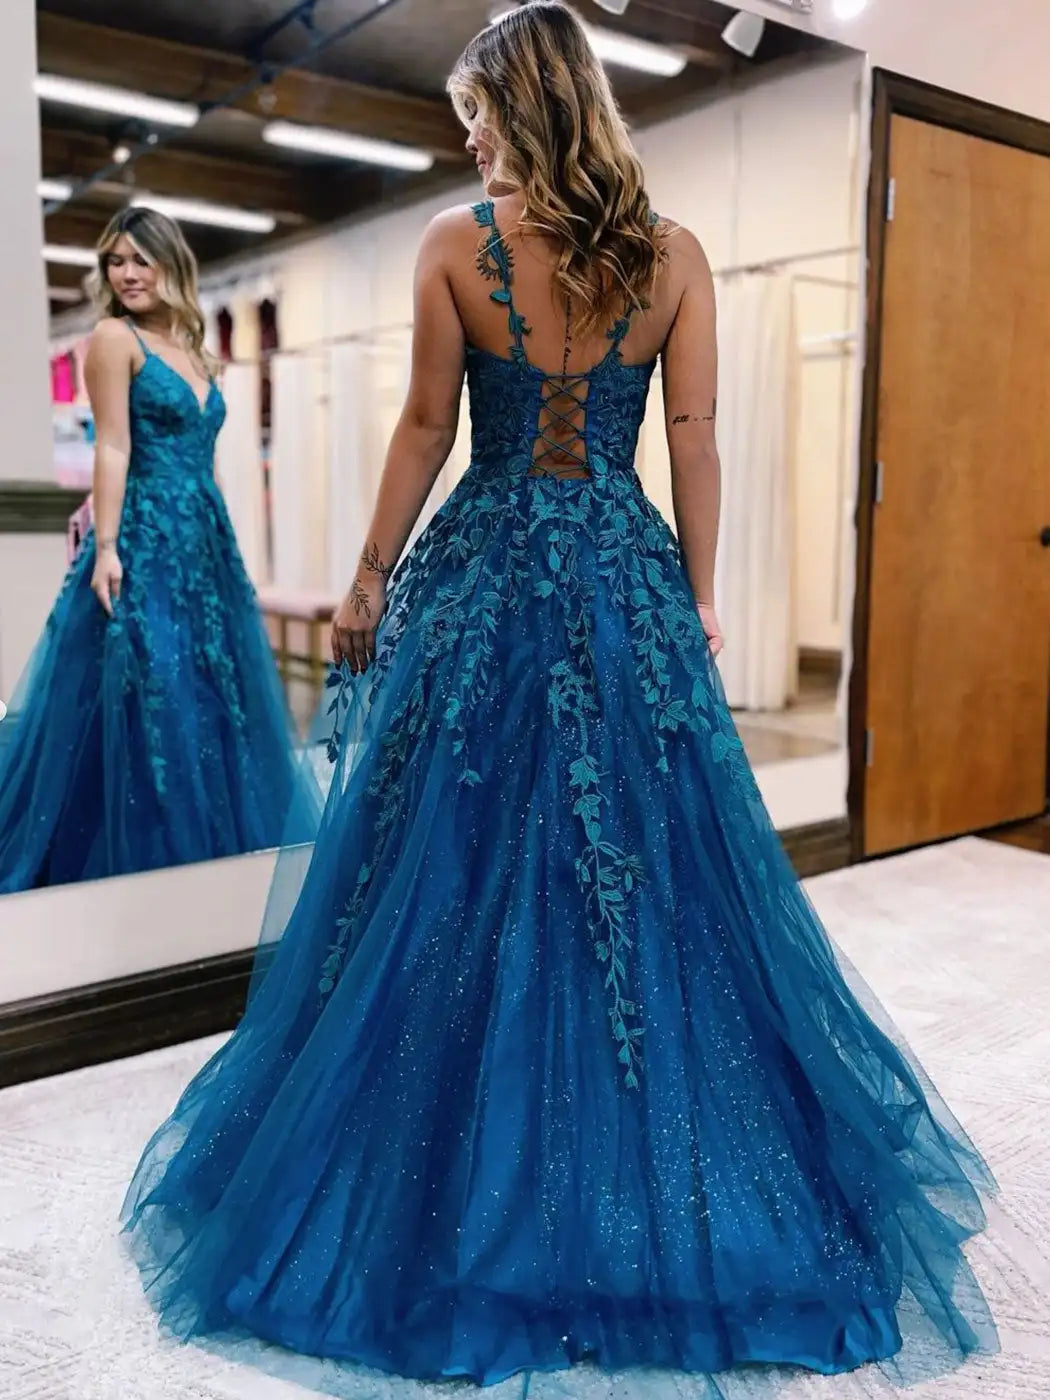 Blue Evening Dresses Lace Applique with Glitters Tulle V-neck Spaghetti Strap A Line Corset Back Formal Party Prom Gowns